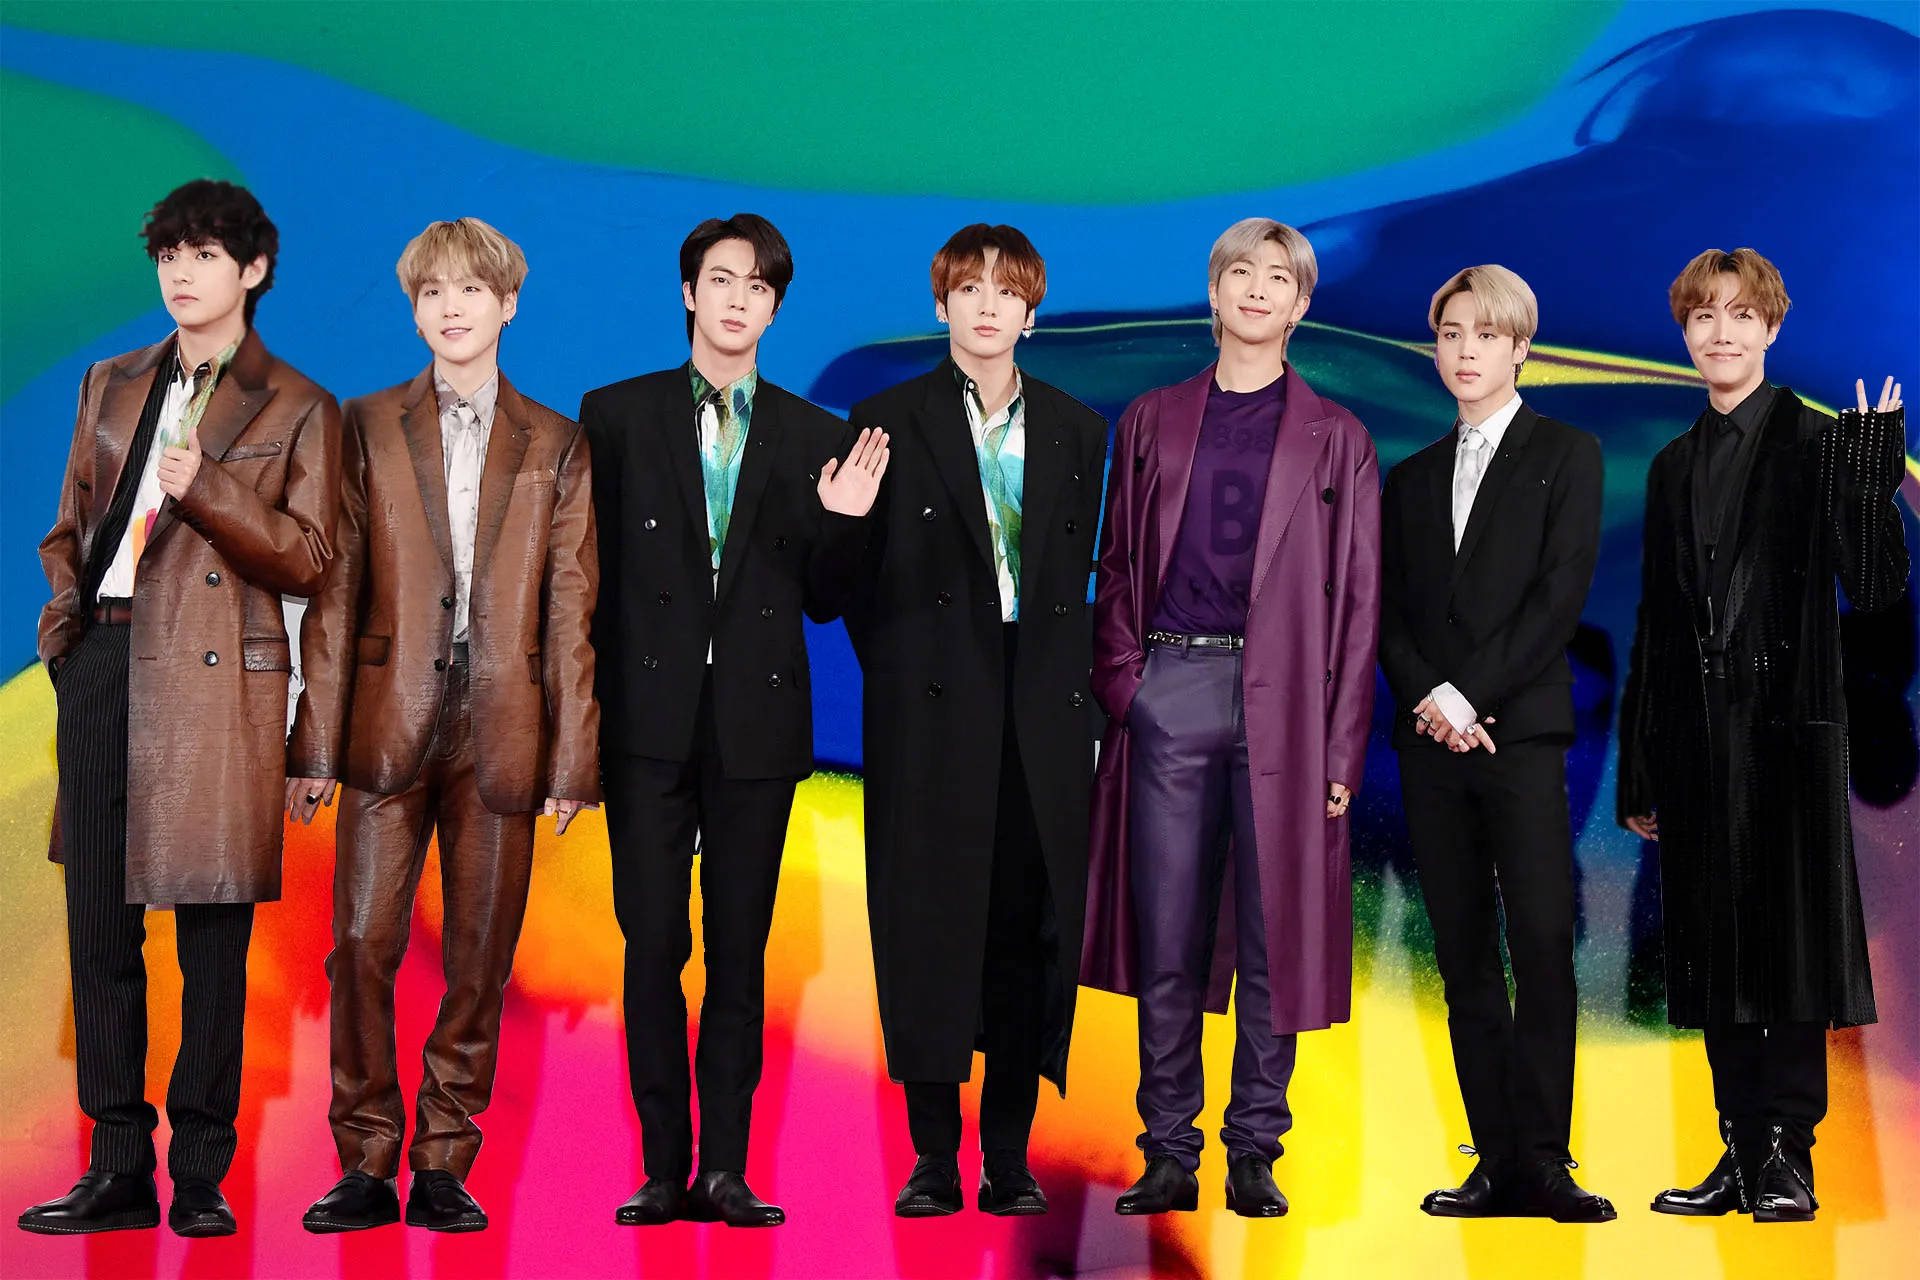 Cute Bts Group On Stage With Rainbow Backdrop